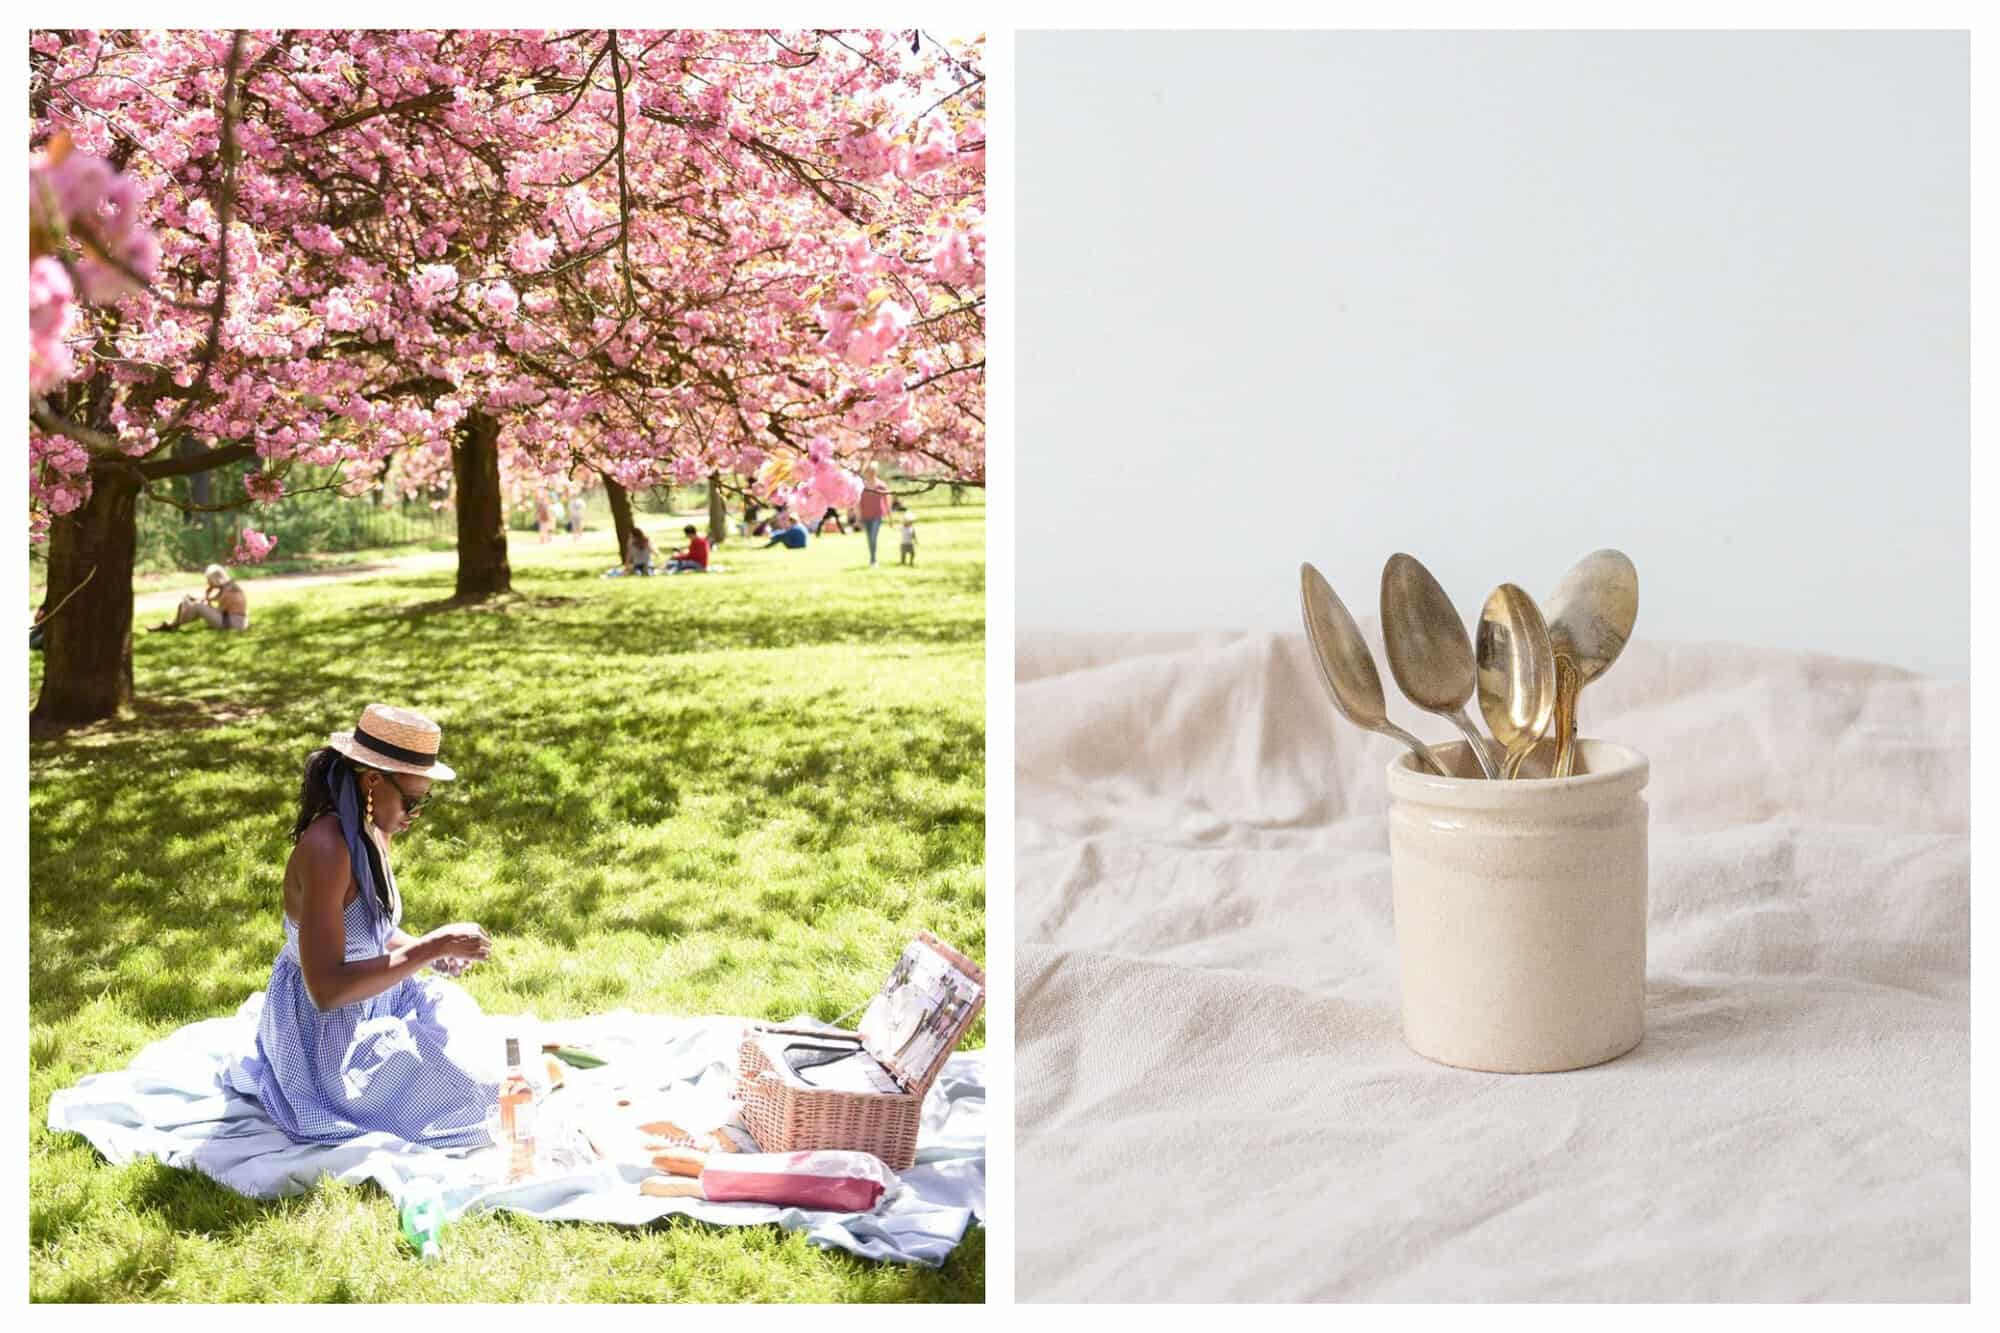 Left: Ajiri is in a parc, doing a picnic, under cherry blossom trees. Right: A set of 4 golden teaspoons in a beige ceramic cup.